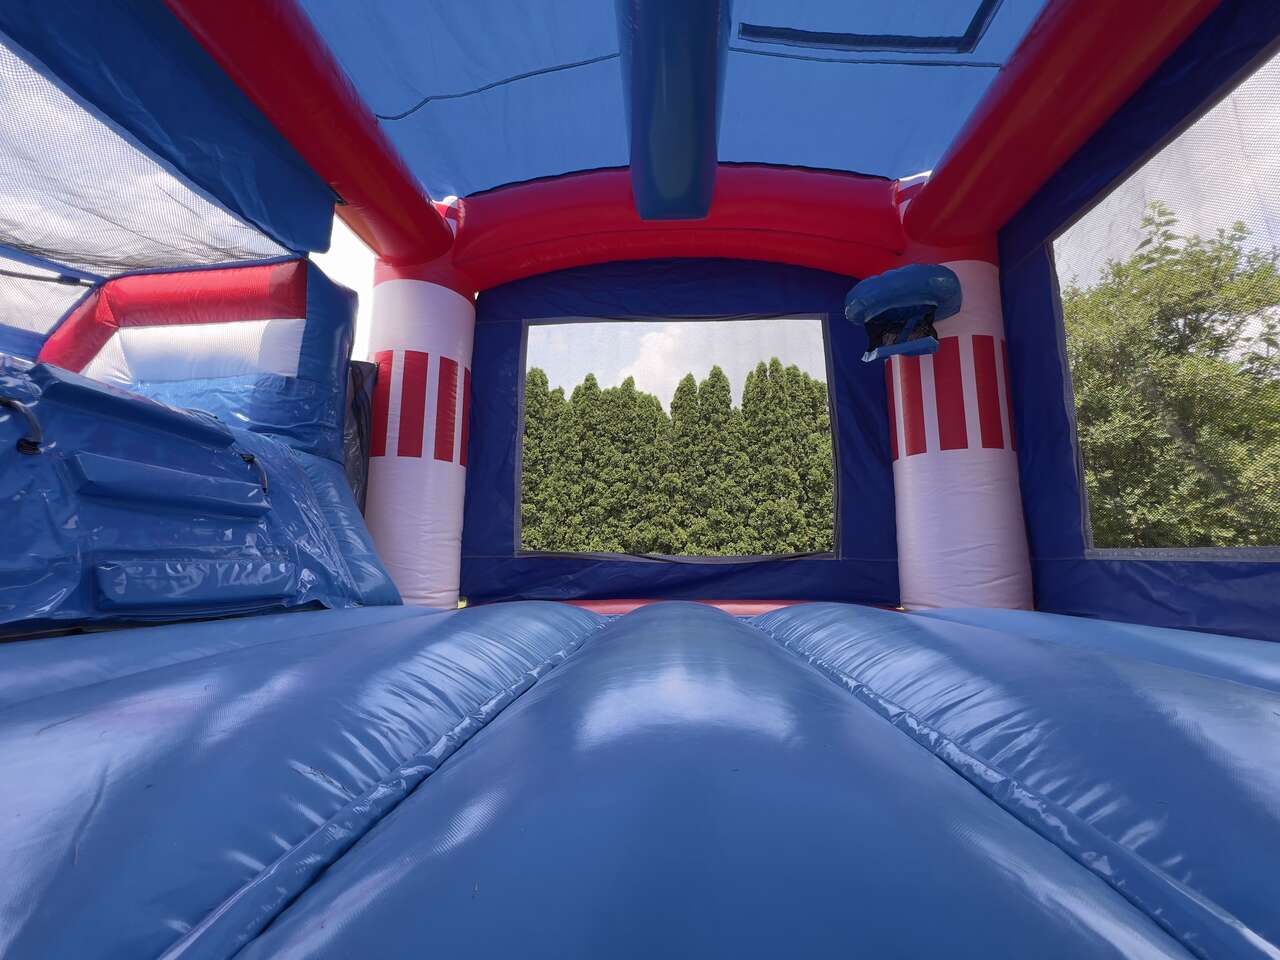 rent best bounce house with a slide by Fun Bounces Rental in Sugar Grove IL, 60554